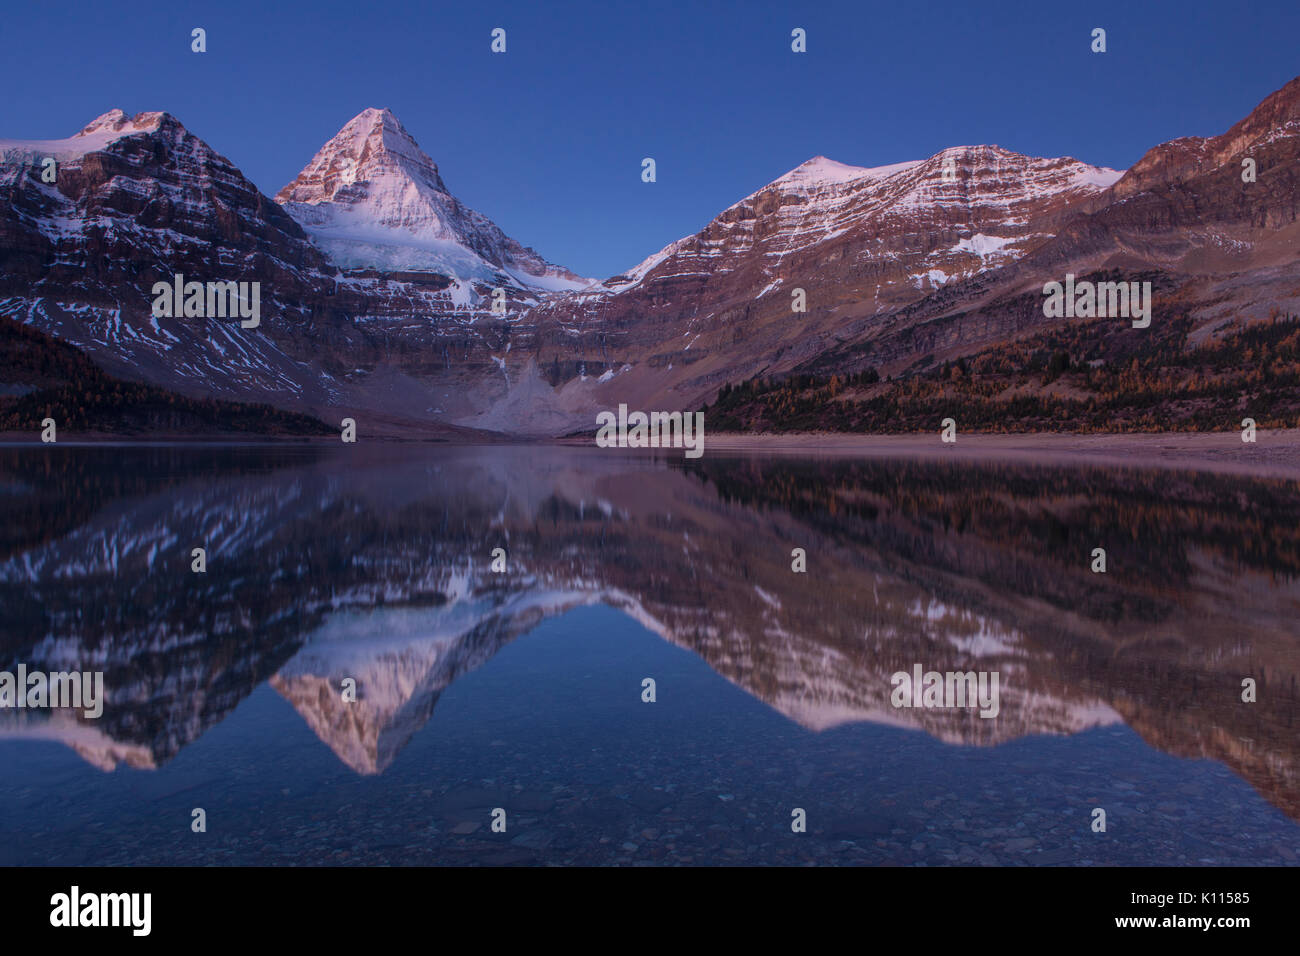 Mount Assiniboine reflected in Lage Magog before sunrise, Mount Assiniboine Provincial Park, Rocky Mountains, British Columbia, Canada. Stock Photo